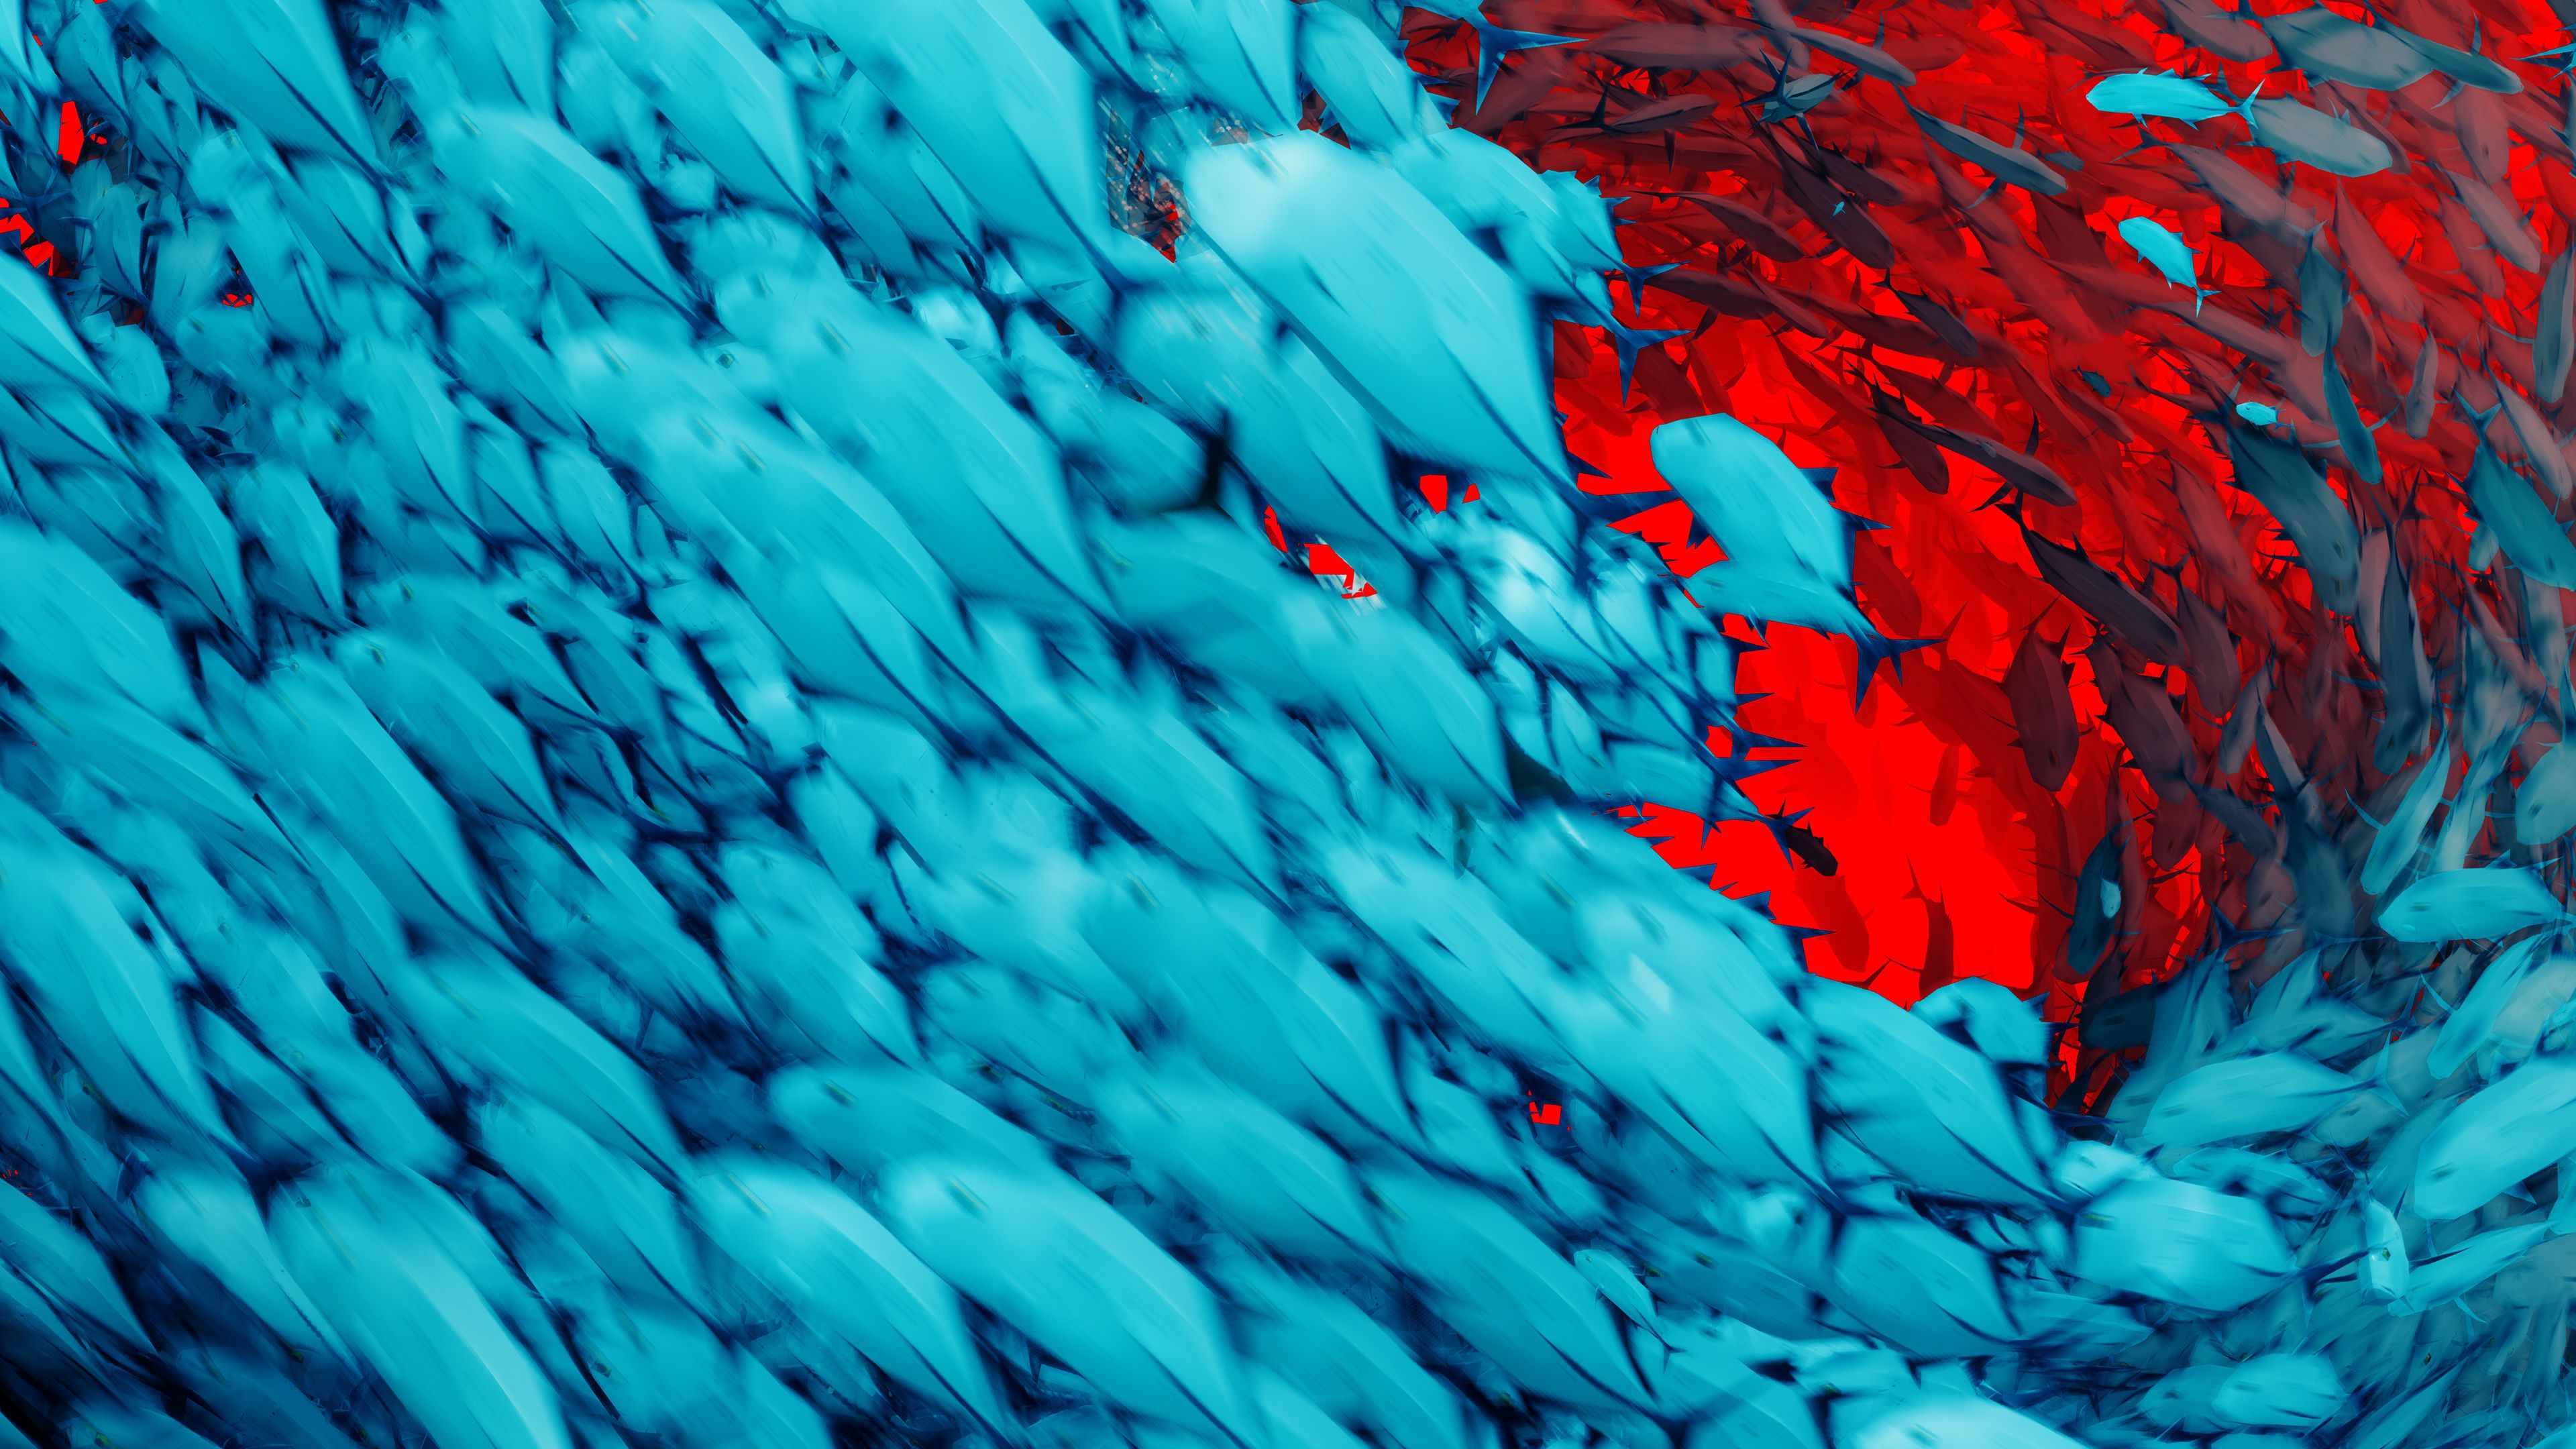 Blue Red Texture Abstract 4k Texture Wallpaper, Hd Wallpaper, Digital Art Wallpaper, Abstract Wallpaper, 5k Wallp. Abstract Wallpaper, Art Wallpaper, Abstract